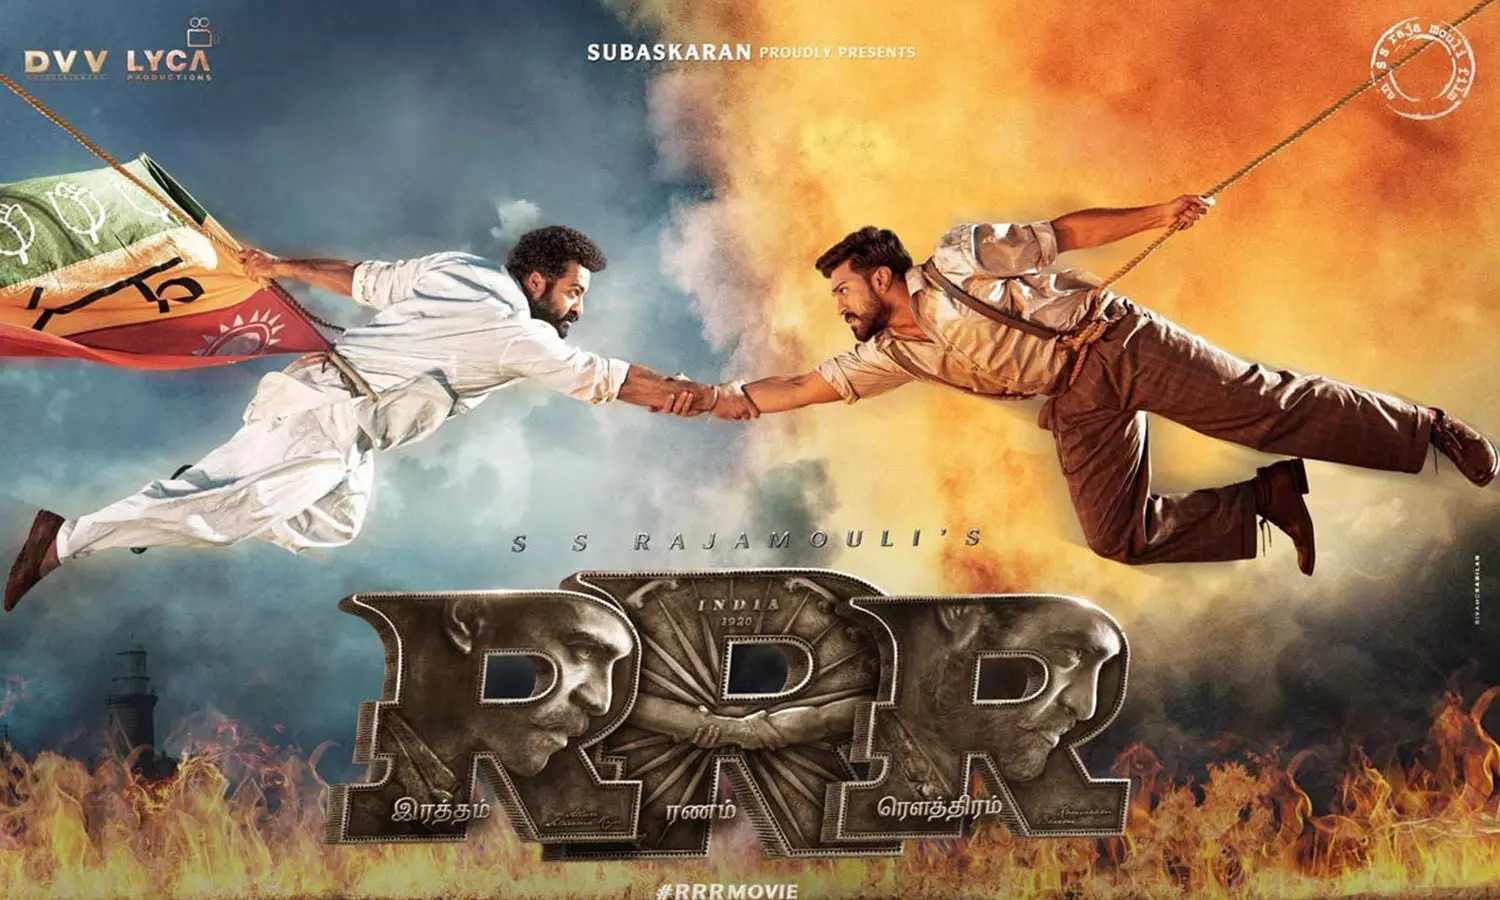 Huge hype surrounds the re-release of Rajamouli's RRR in the USA